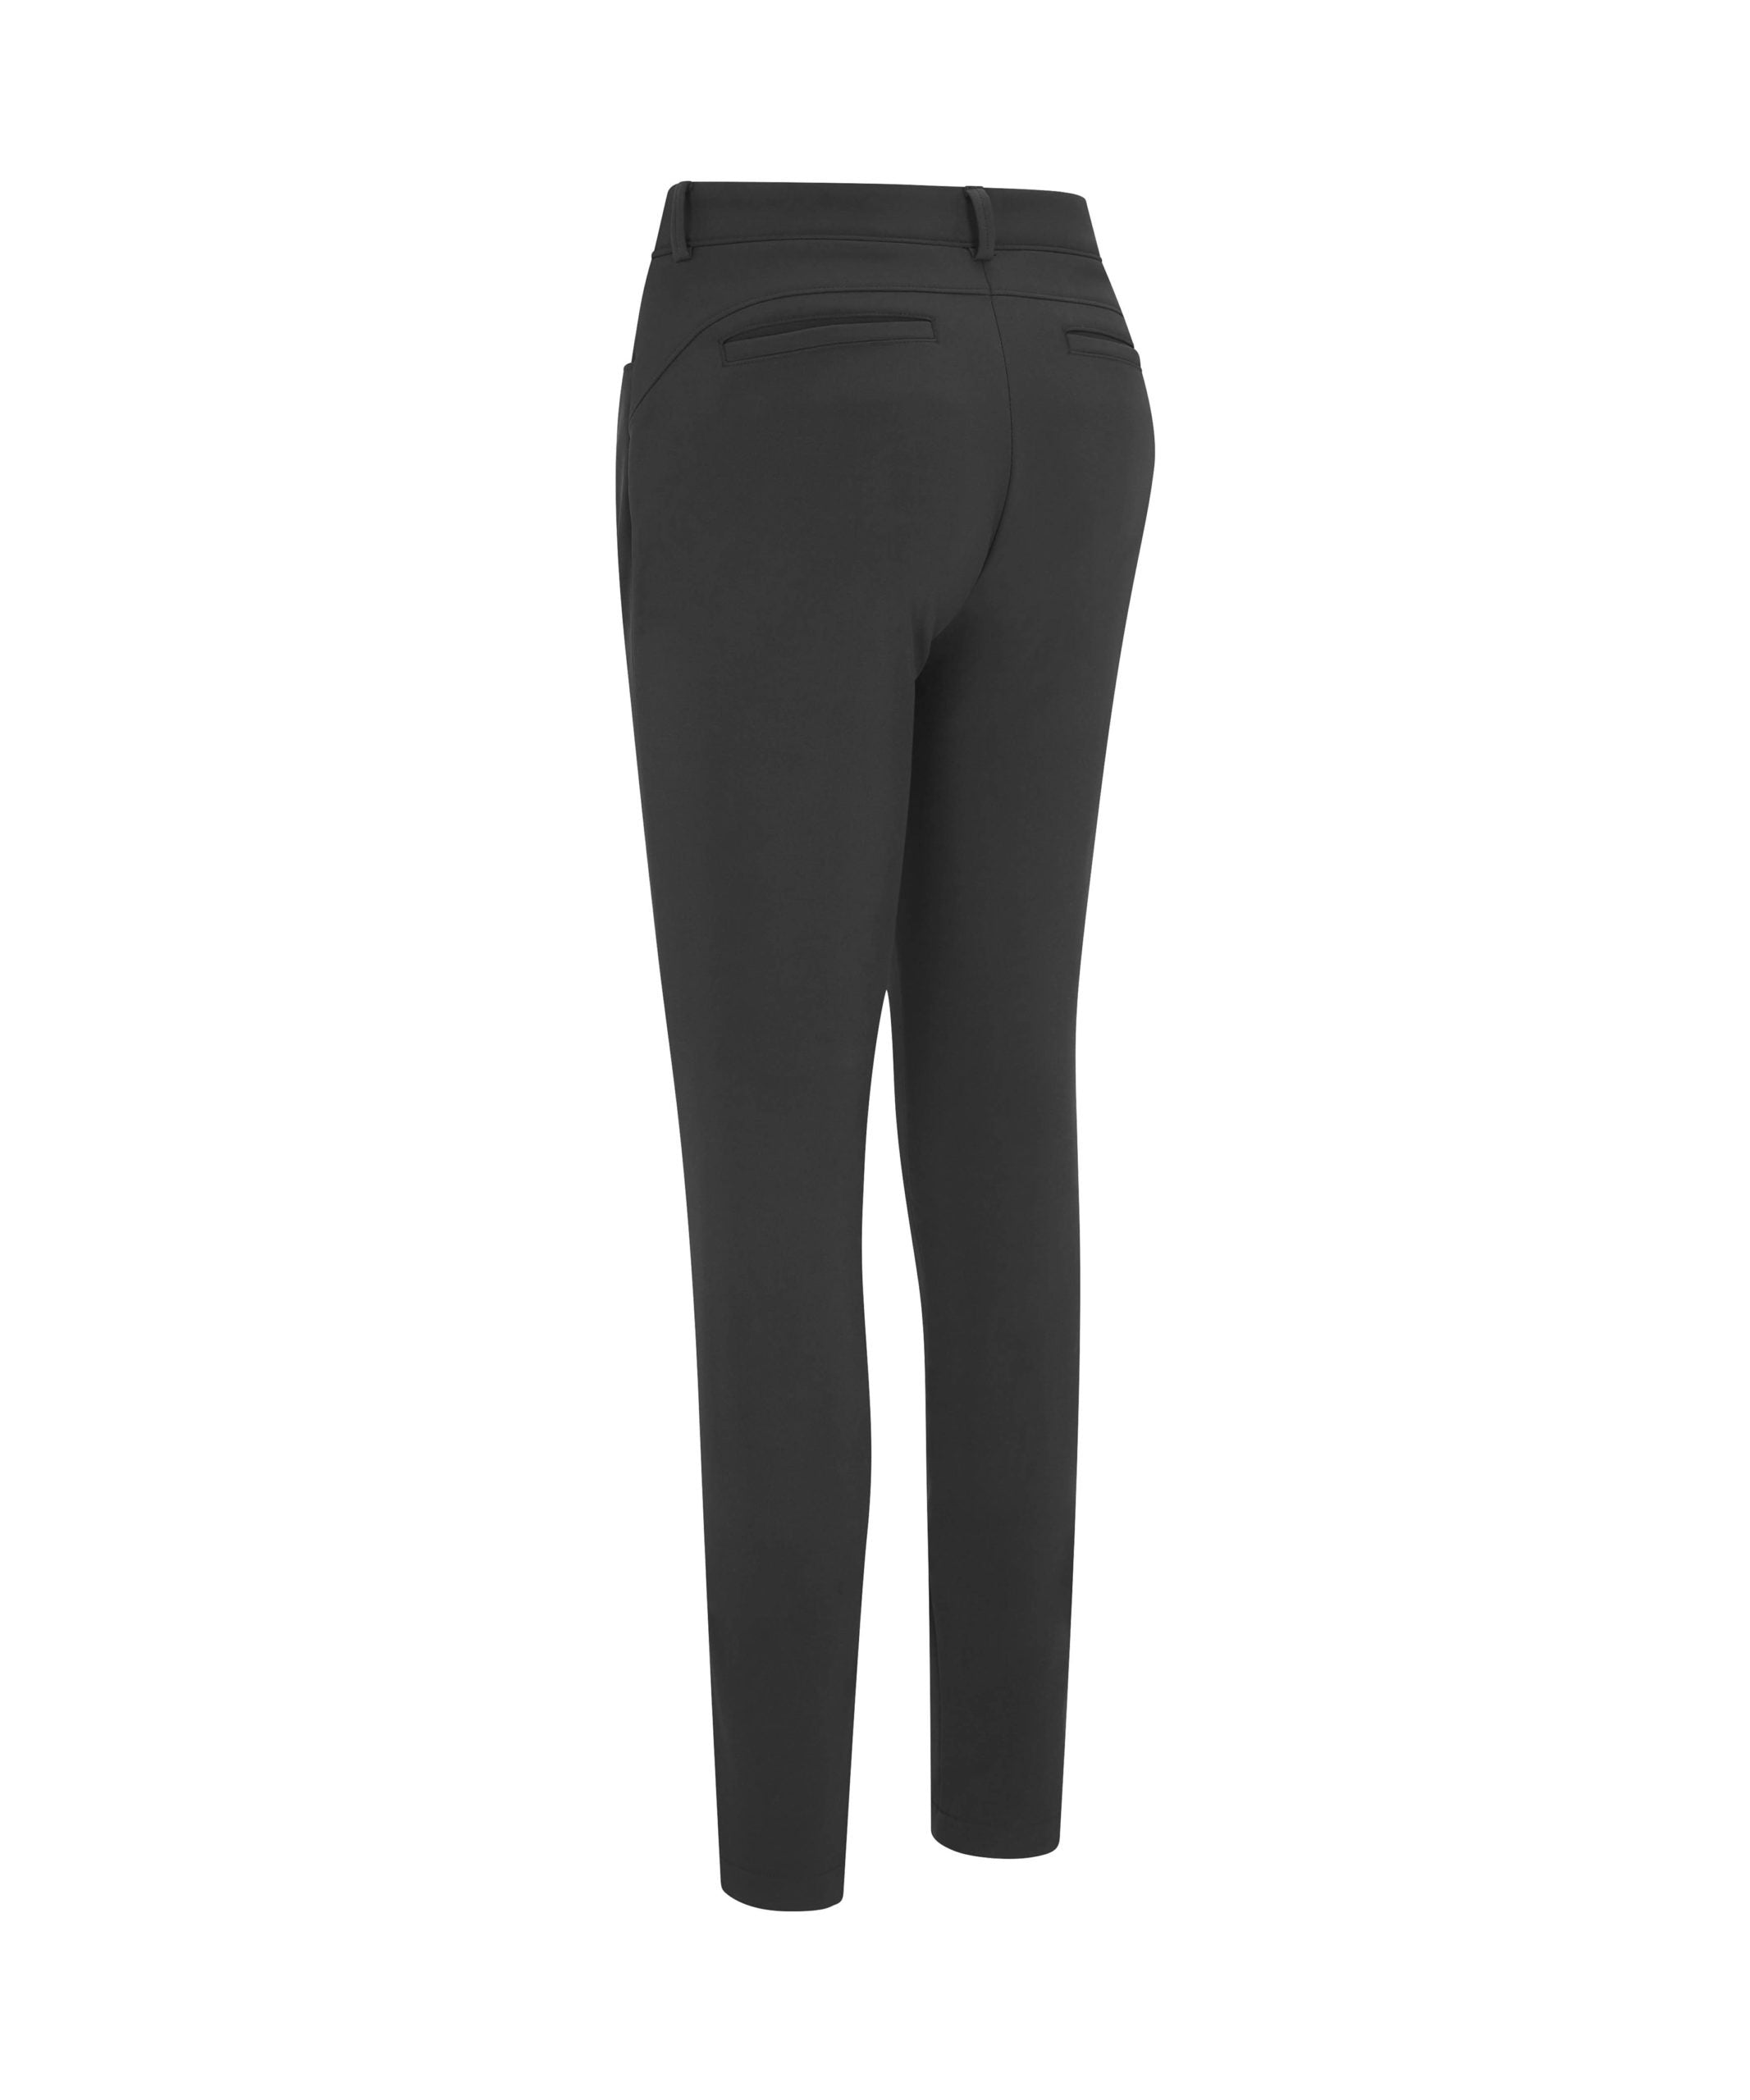 View Thermal Trousers In Caviar Caviar M 32 information